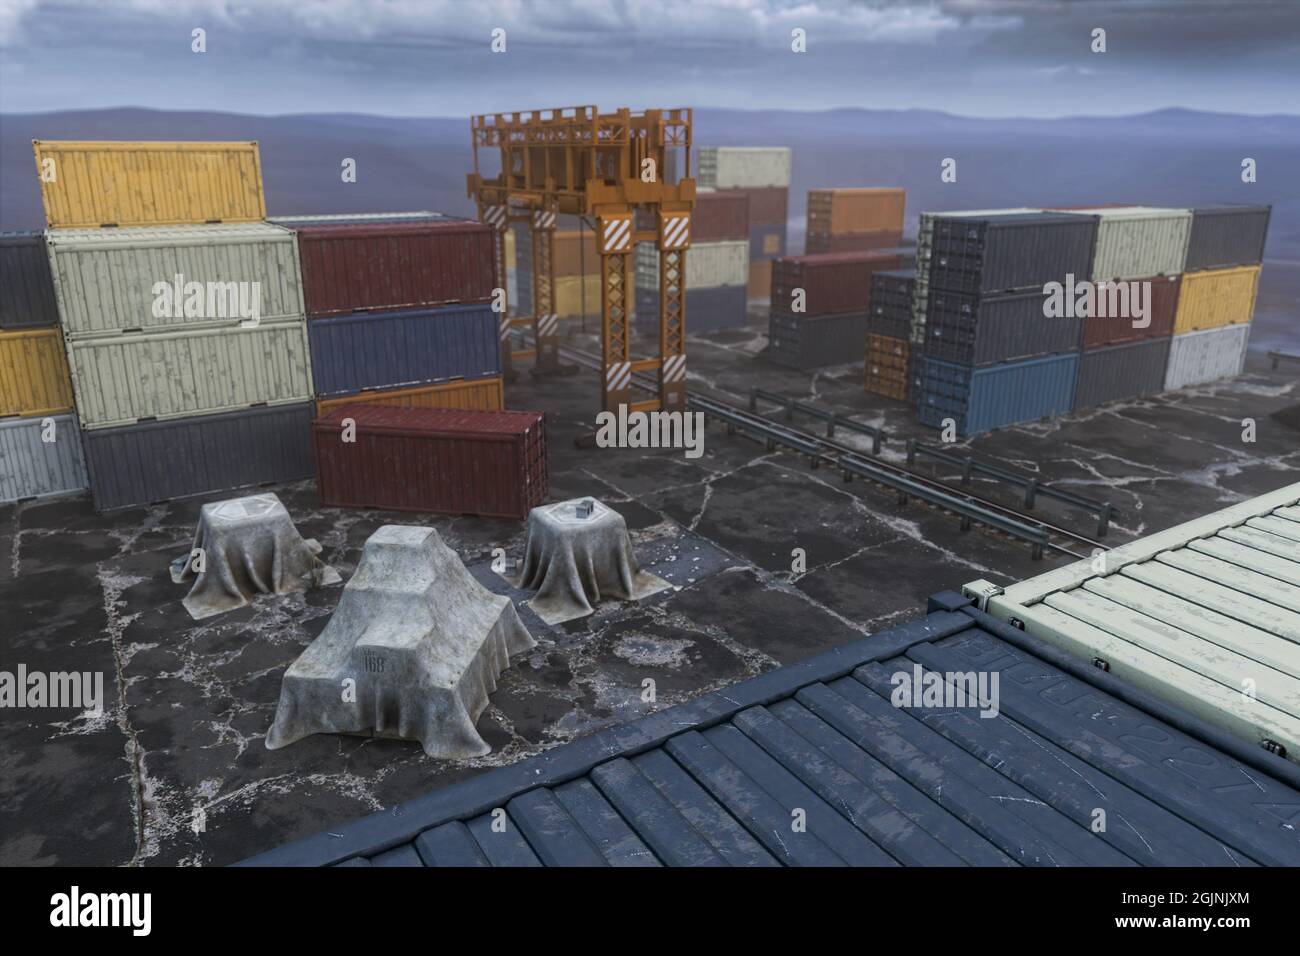 3D illustration of a generic docklands shipping container yard viewed from the top of a stack of containers. Stock Photo